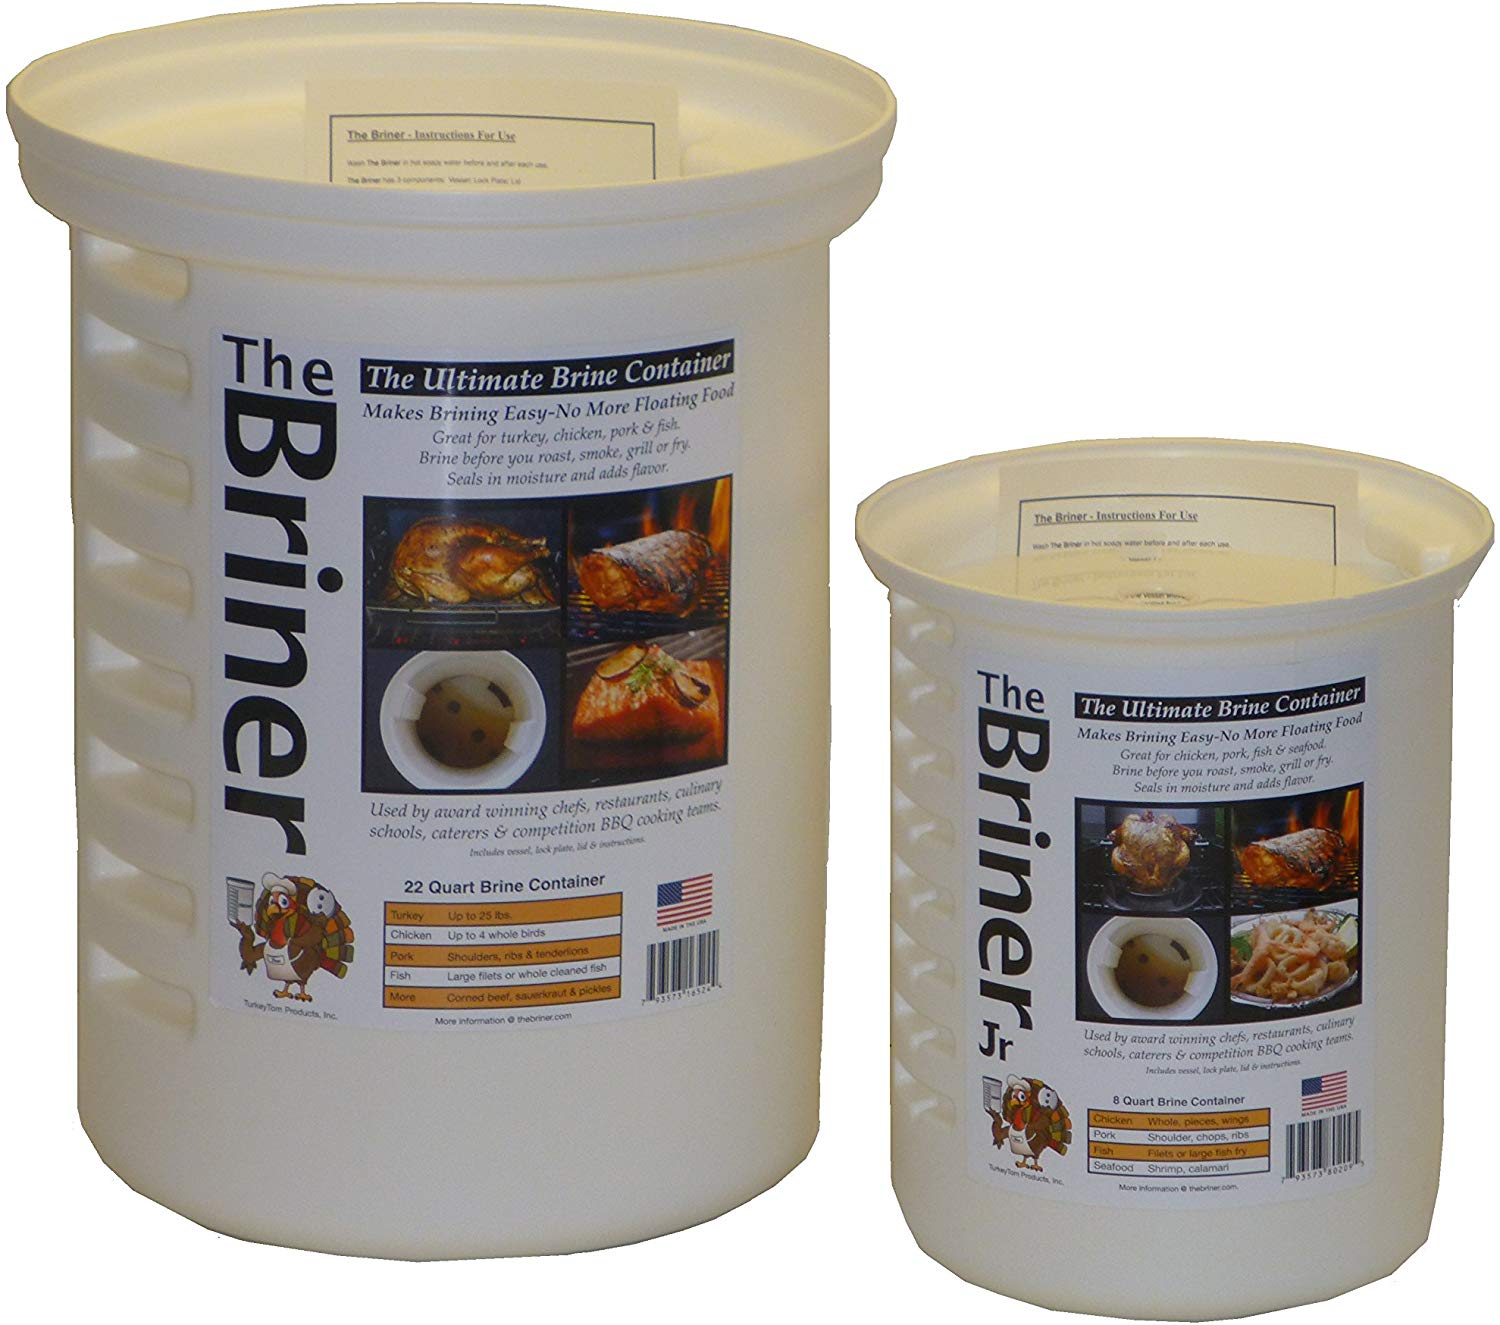 https://www.meadowcreekbbqsupply.com/wp-content/uploads/2019/11/The_Briner_The_Ultimate_Brine_Container.jpg